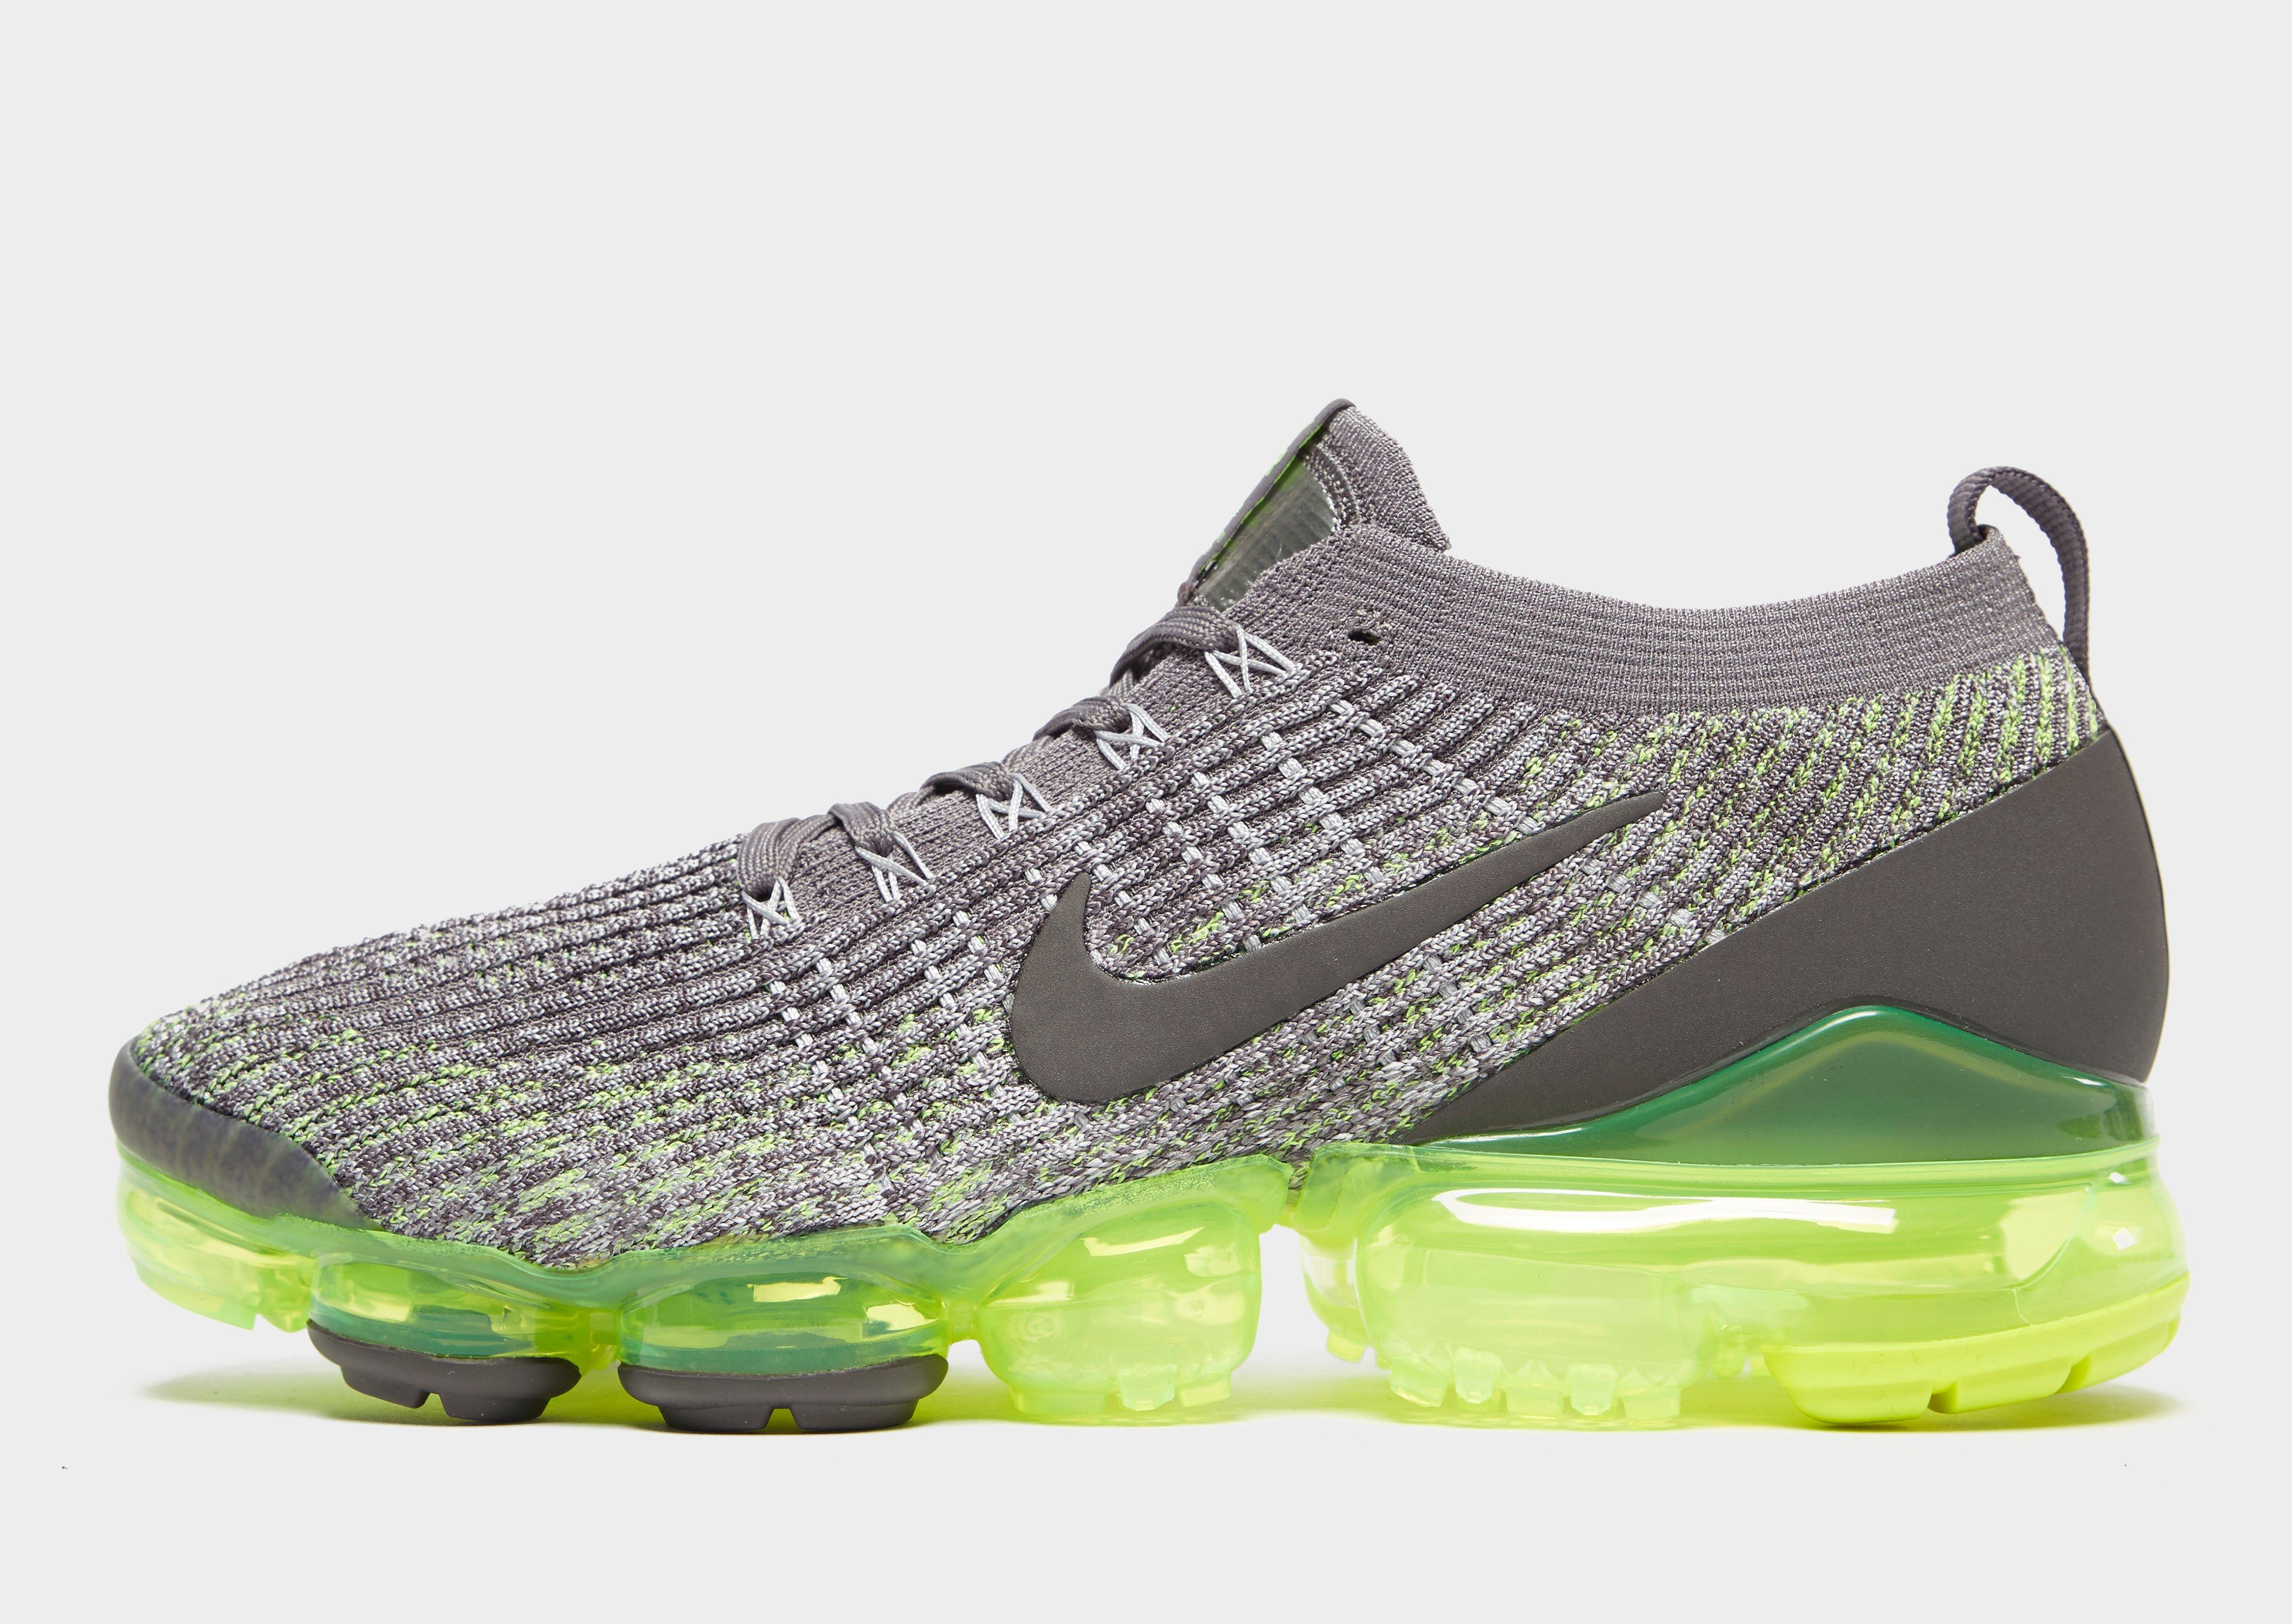 vapormax flyknit grey and green